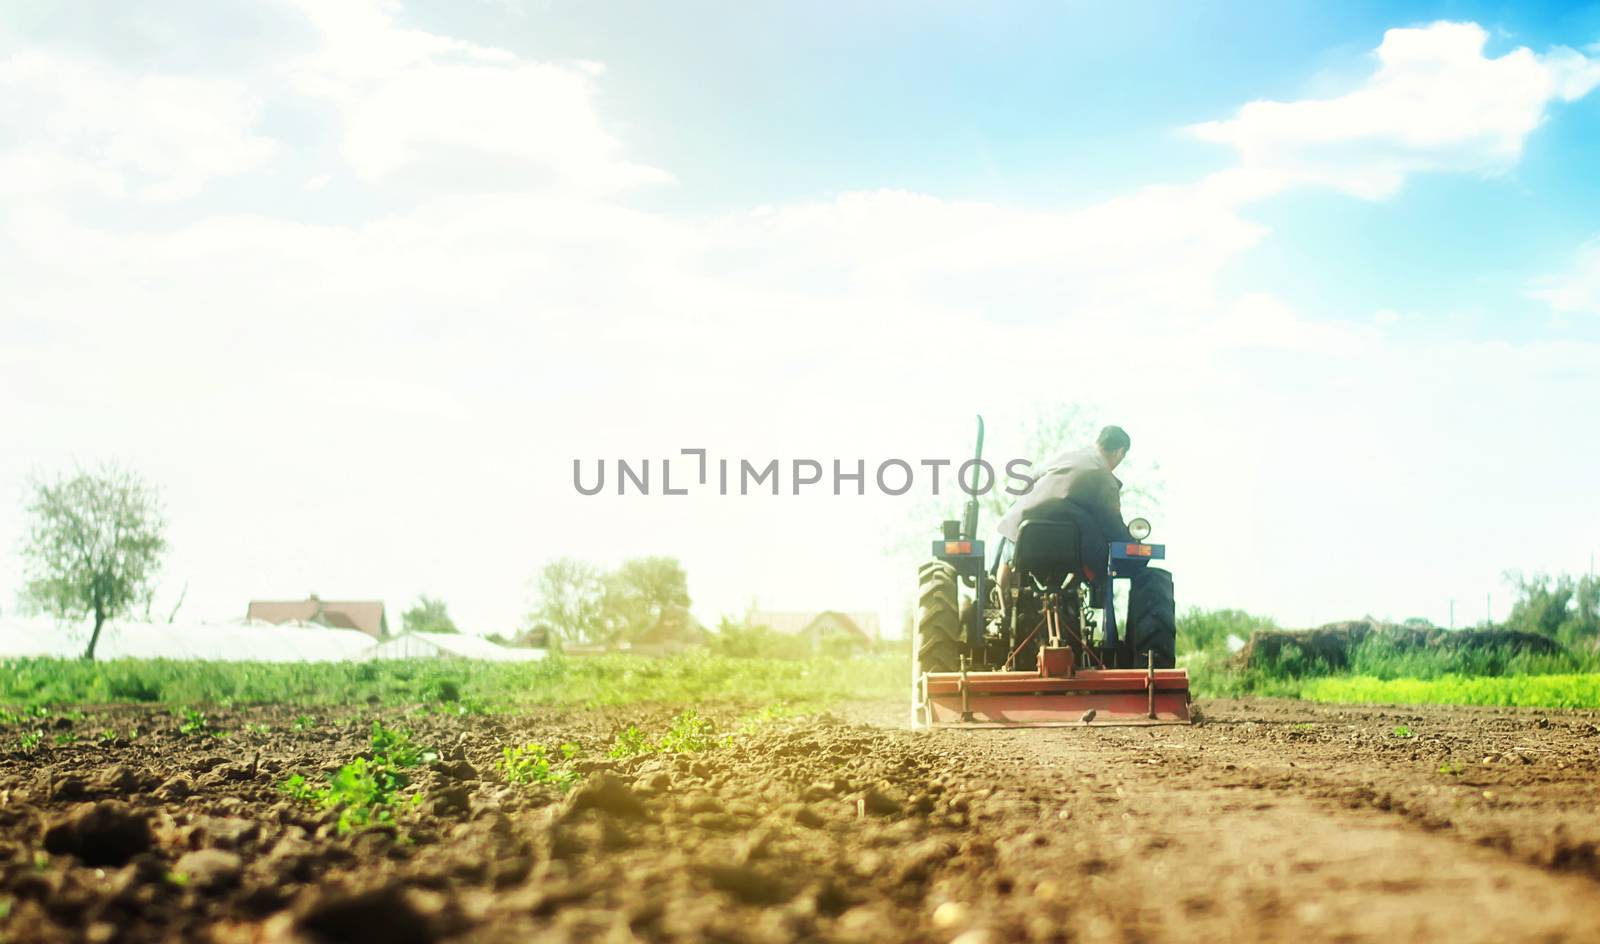 Farmer on a tractor with milling machine loosens, grinds and mixes soil. Loosening the surface, cultivating the land for further planting. Farming and agriculture. Cultivation technology equipment by iLixe48